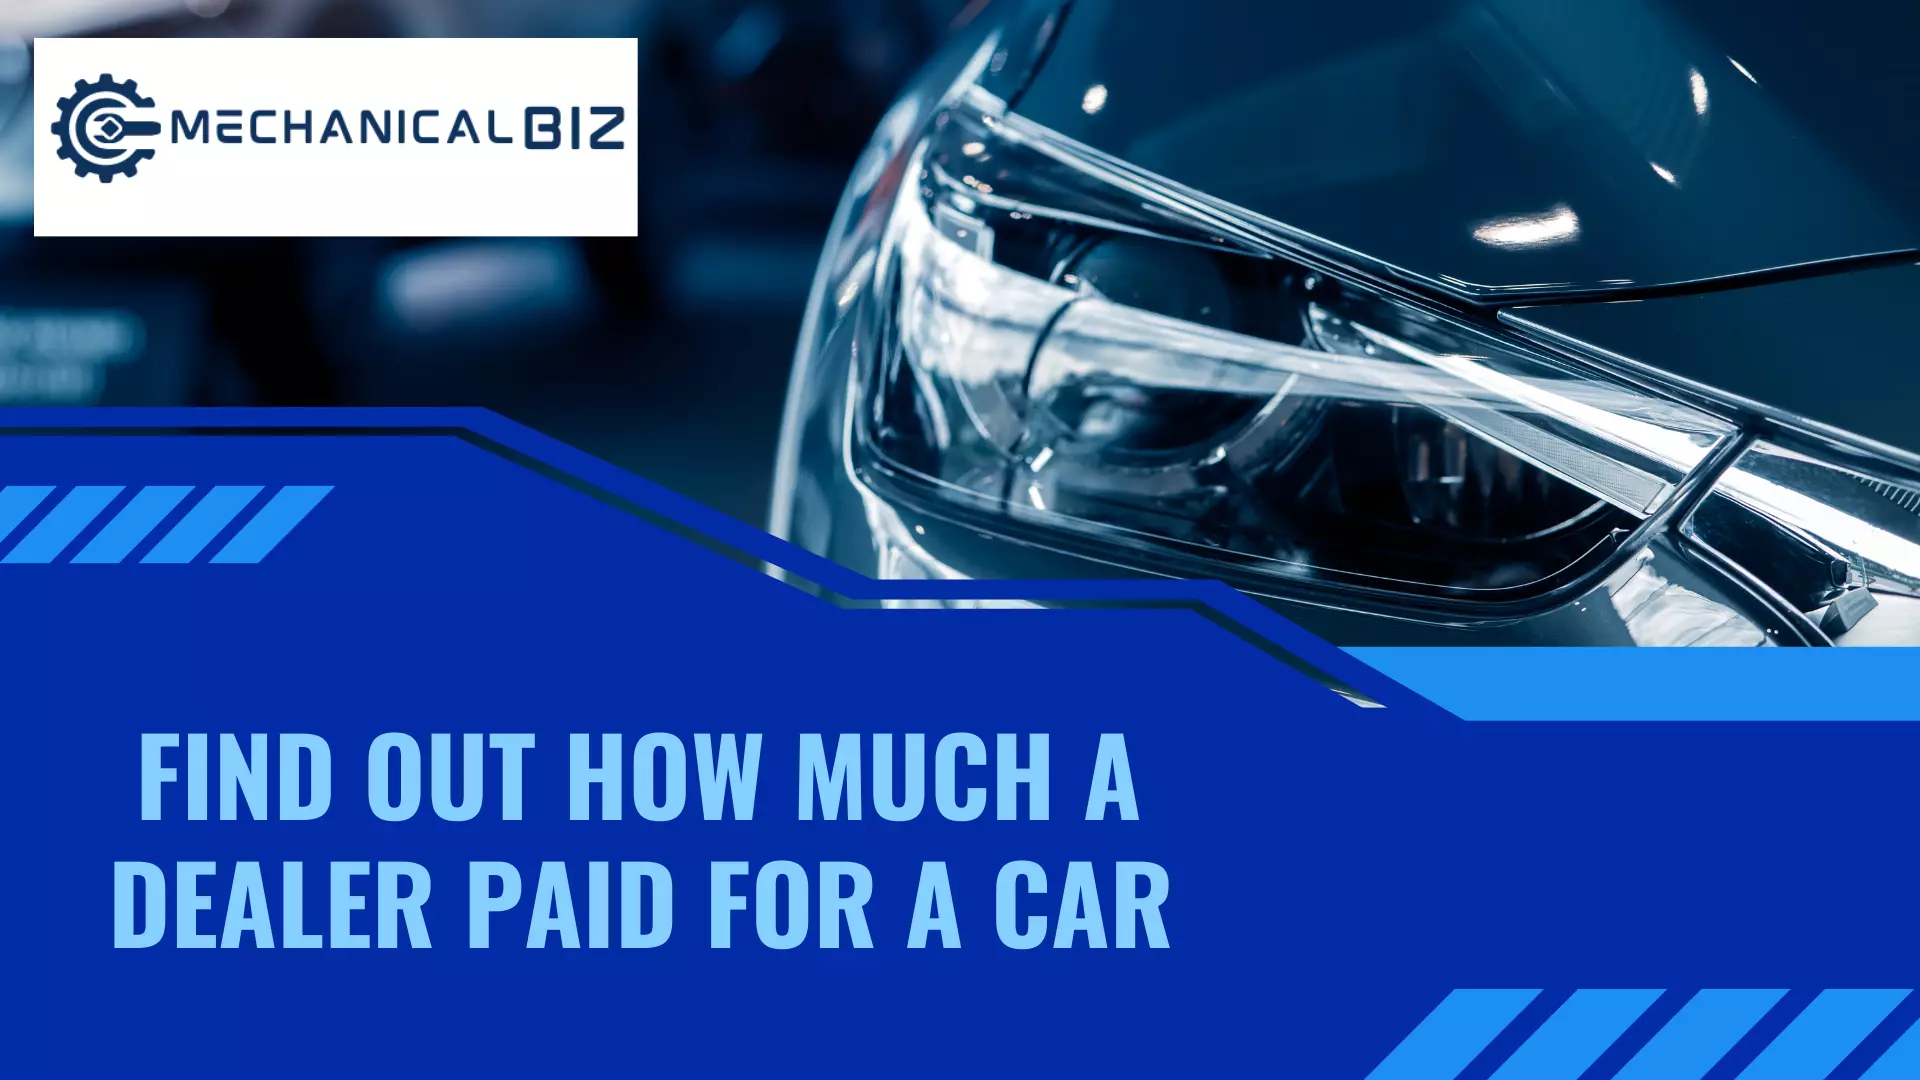 How to Find Out How Much a Dealer Paid for a Car